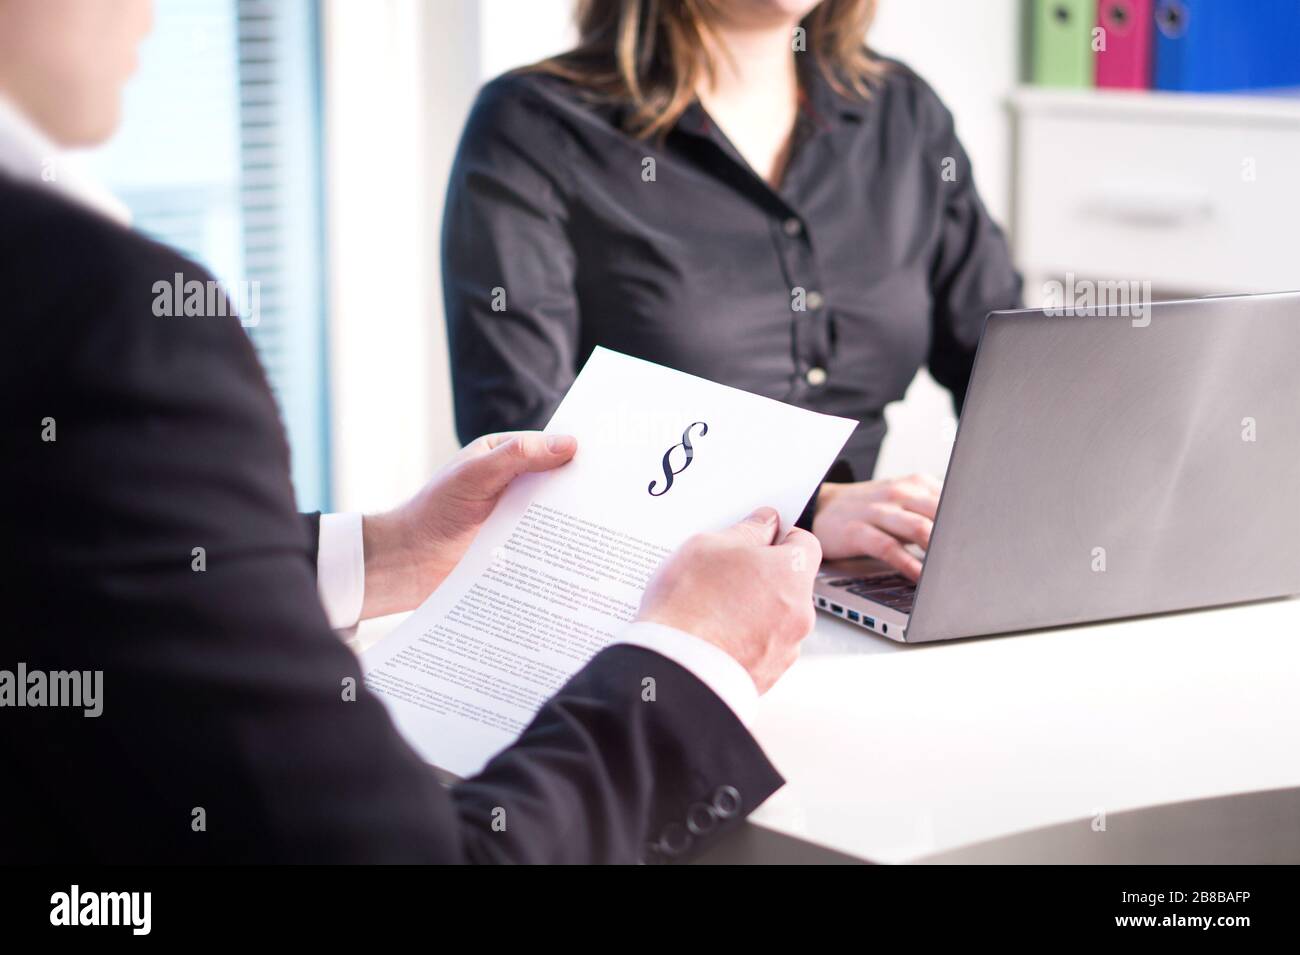 Two lawyers having meeting in office. Professional legal team and company working. Teamwork in law firm. Woman typing with laptop and man reading. Stock Photo